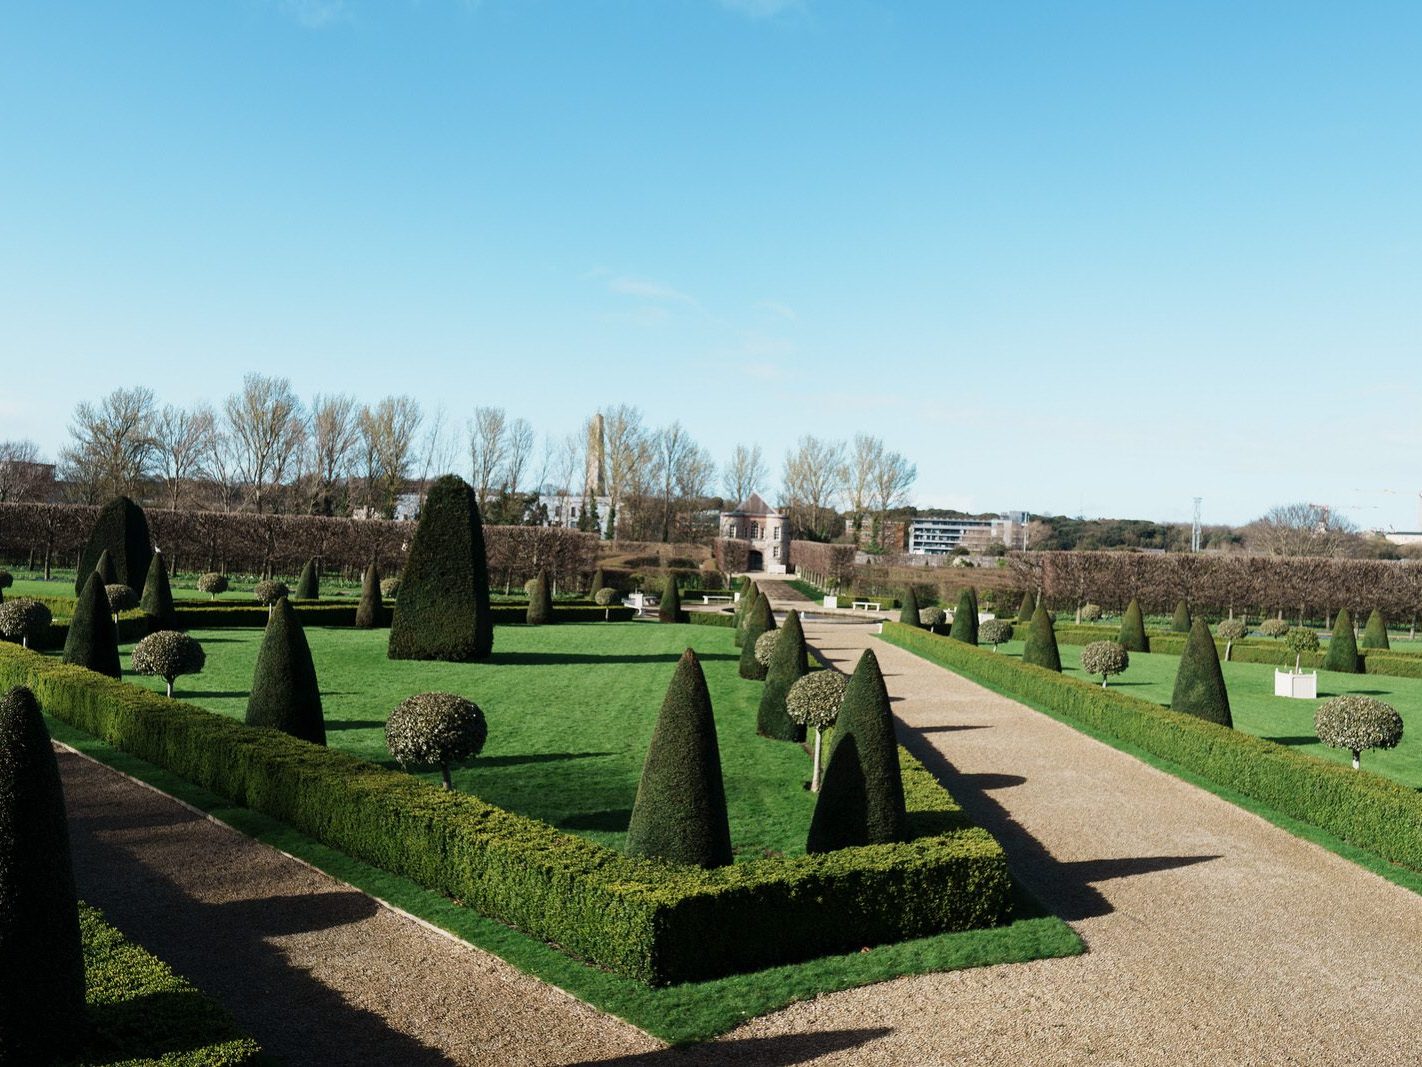 THE FORMAL GARDENS [AT THE IRISH MUSEUM FOR MODERN ART]-223143-1